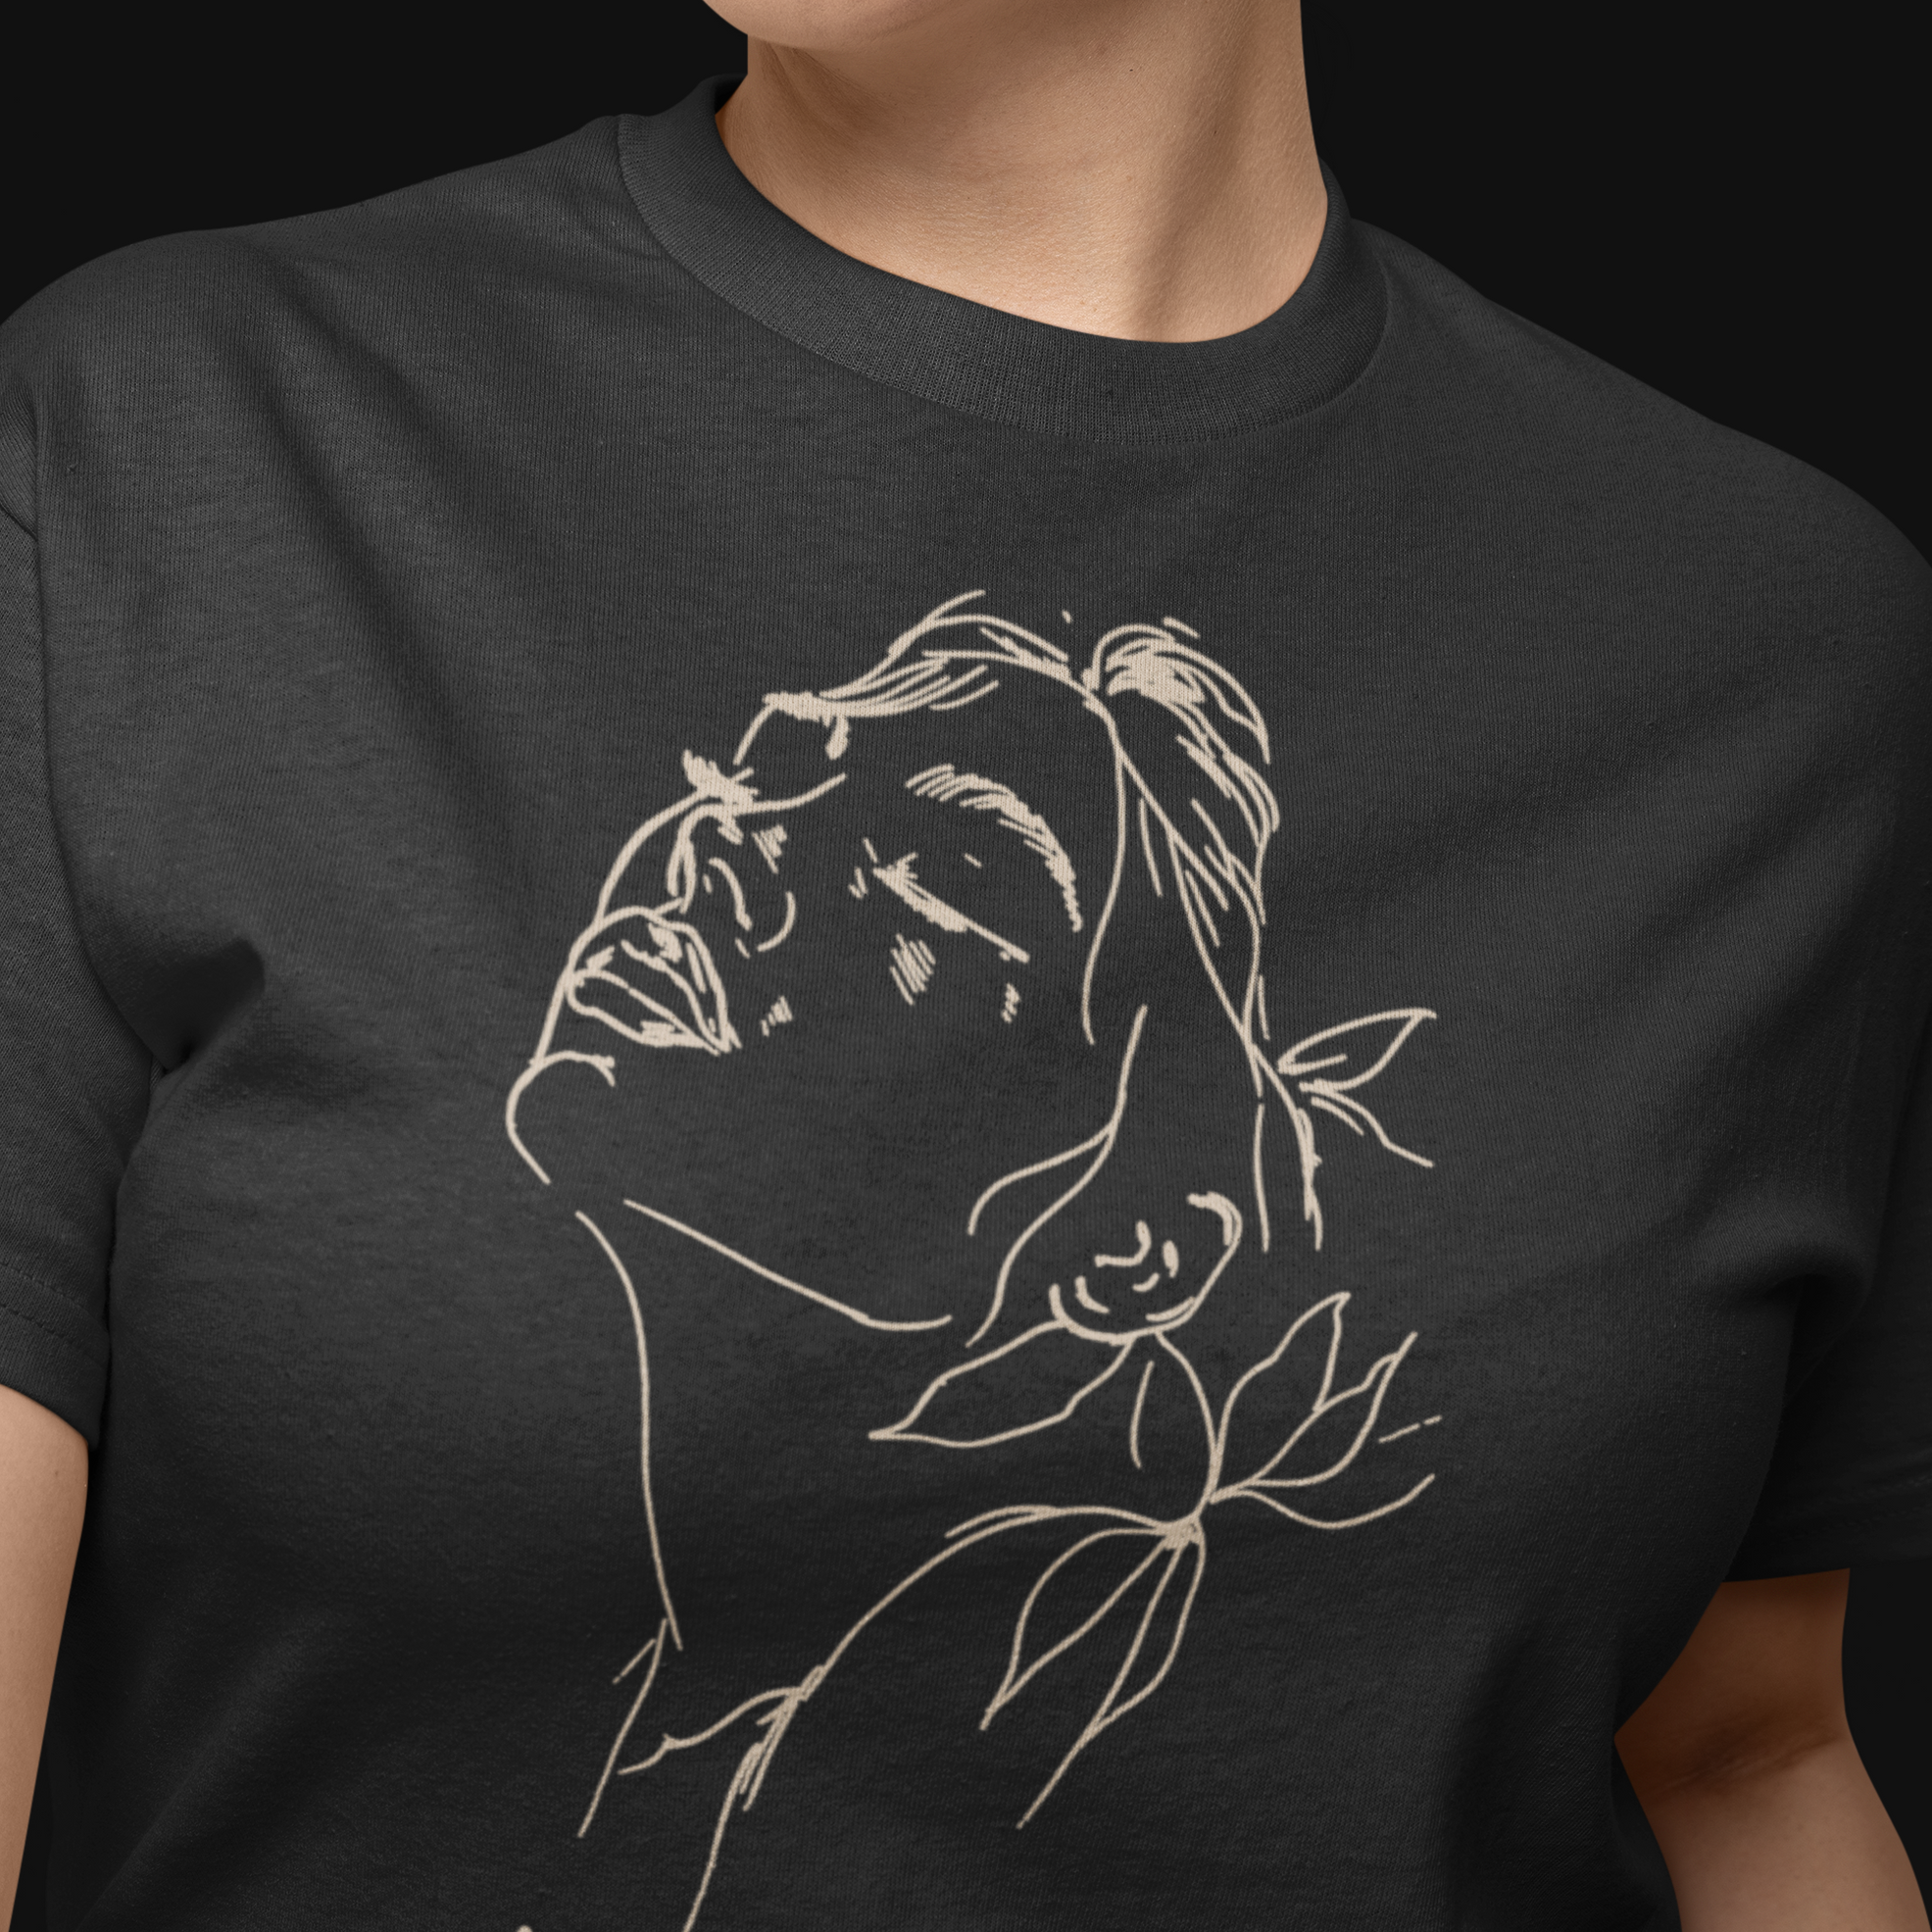 Limited Edition Cotton tshirt for women with Minimalistic Woman Design